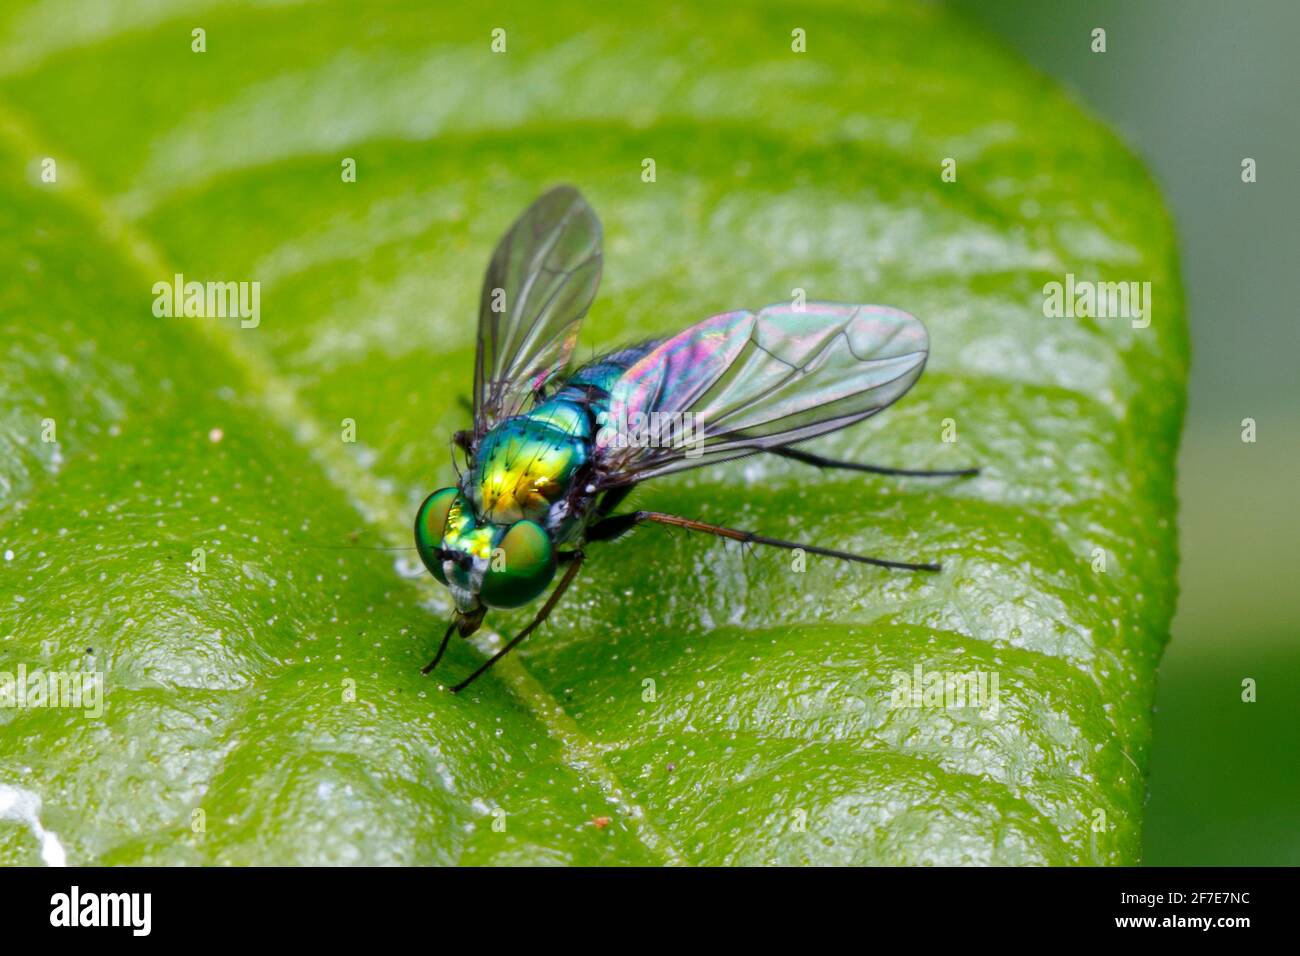 A long-legged fly is foraging on a leaf. Stock Photo